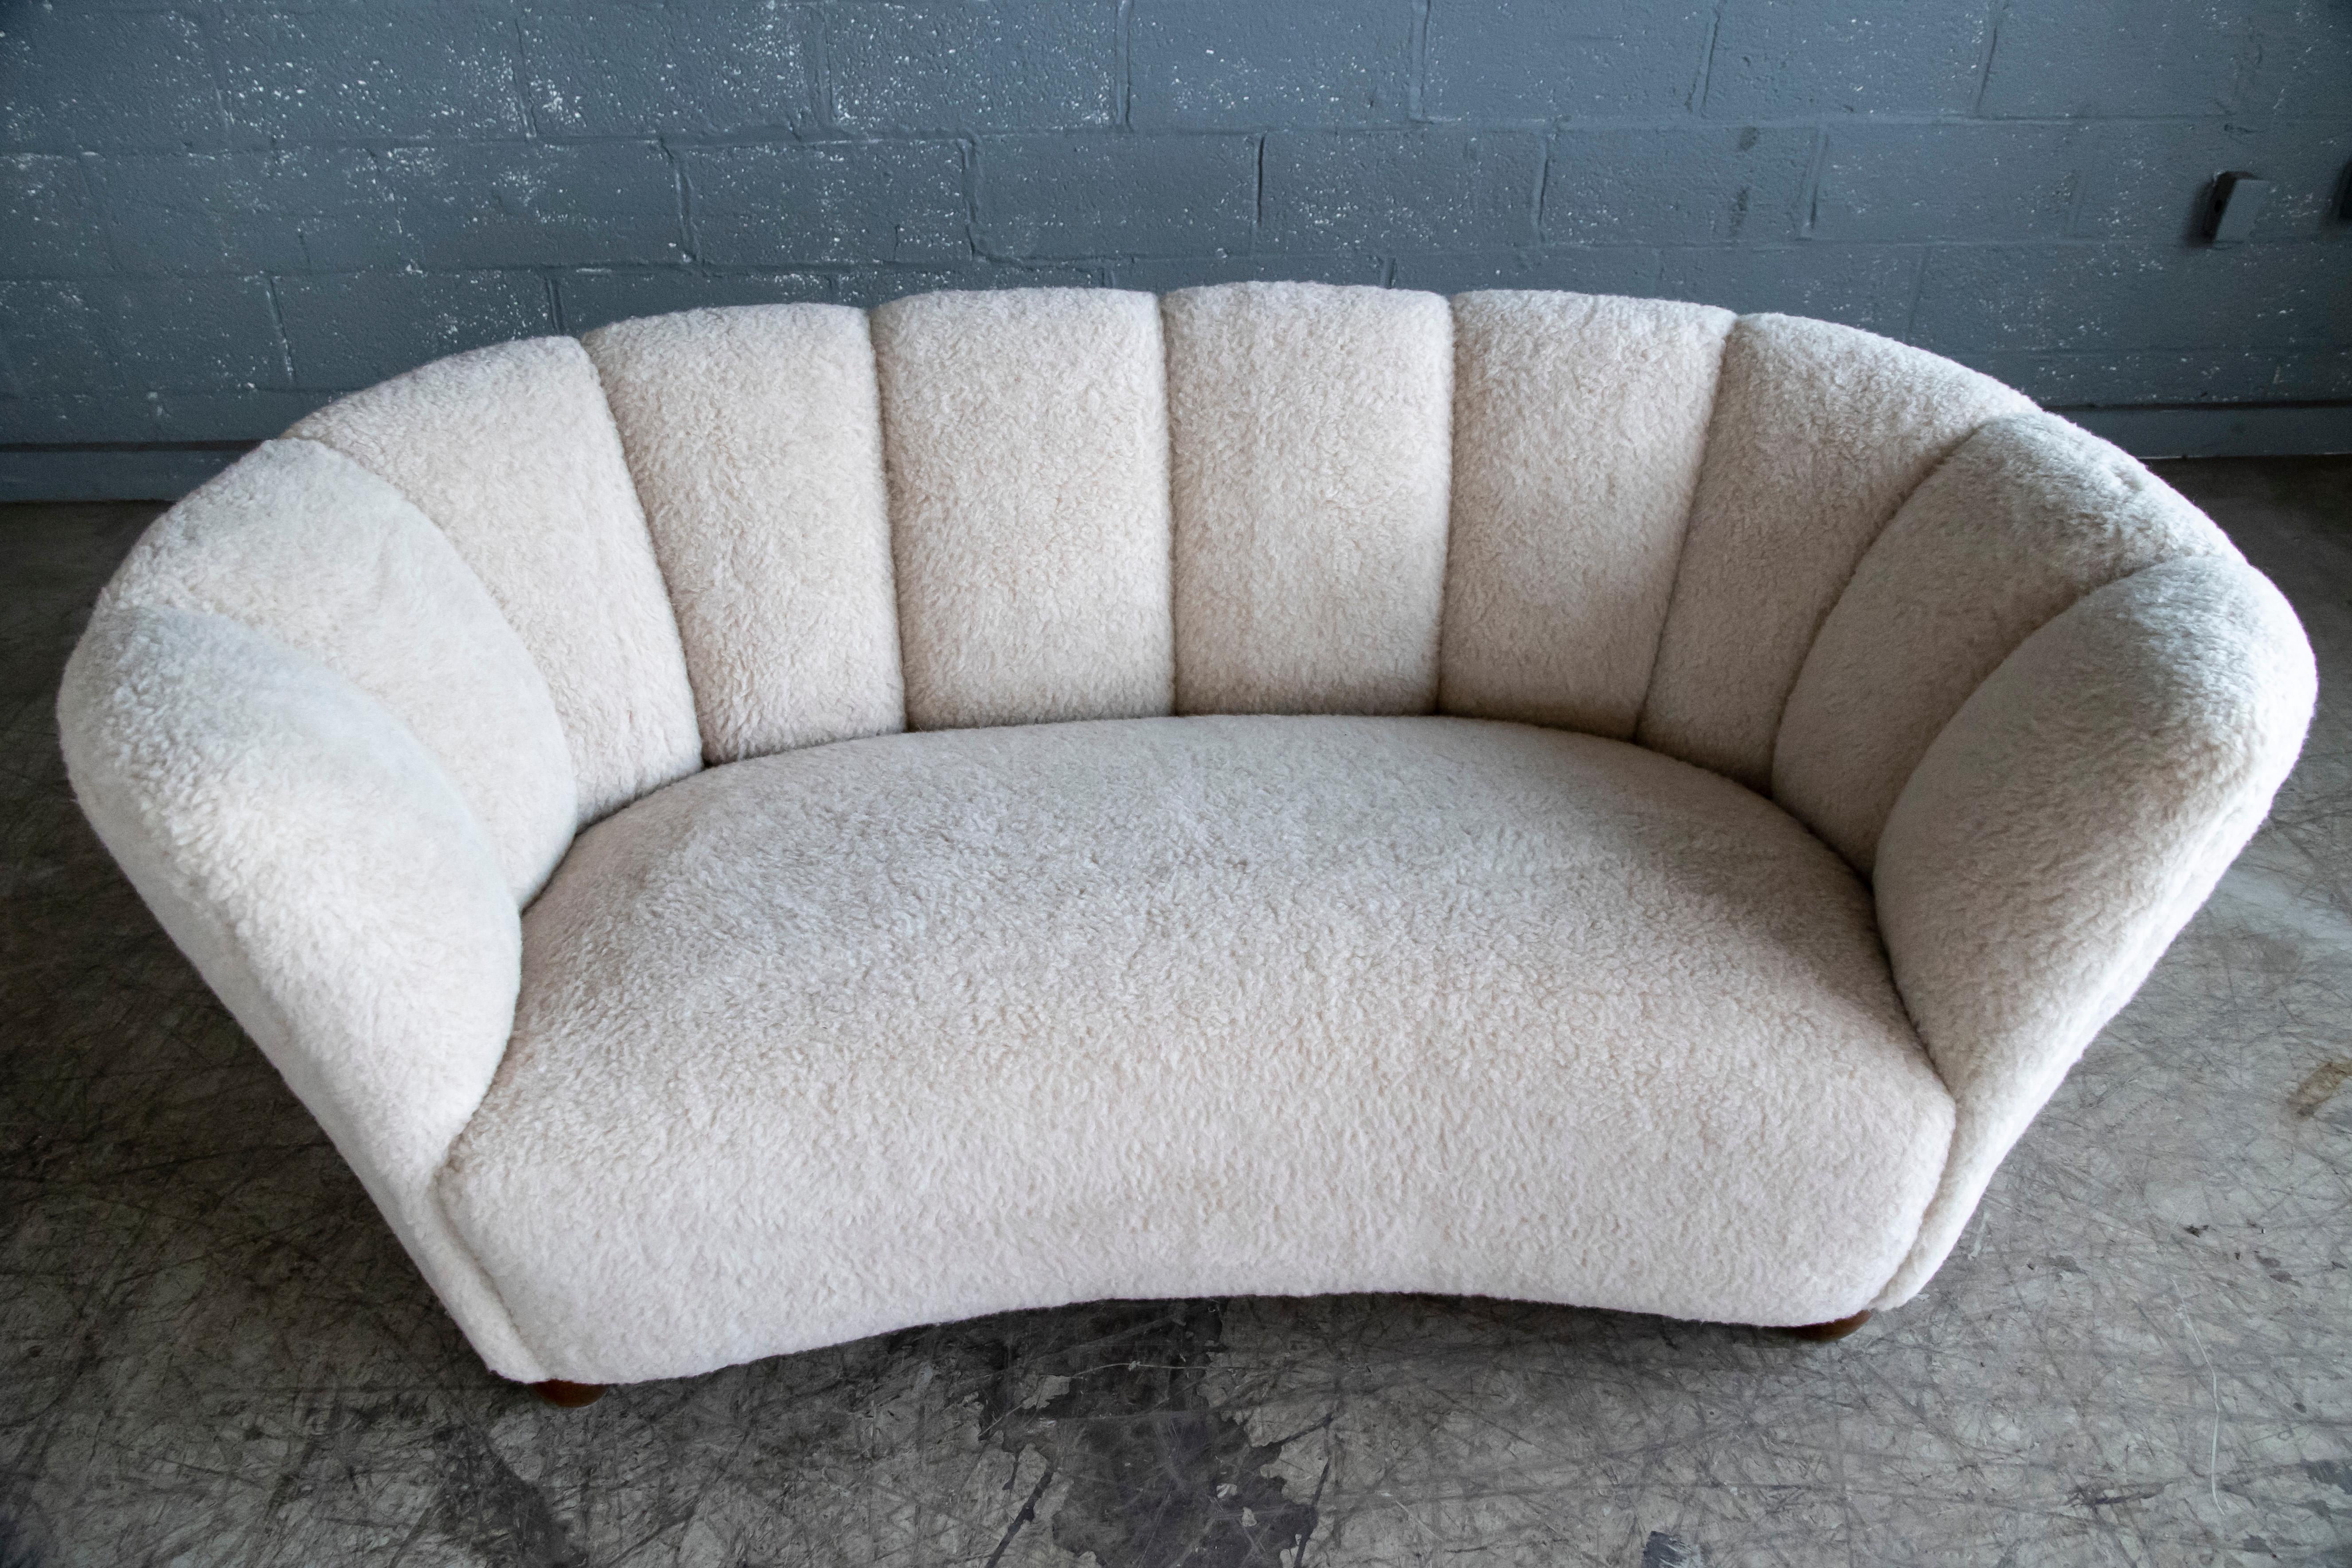 Danish 1940's Banana Shaped Curved Loveseat or Sofa Covered in Beige Lambswool 3